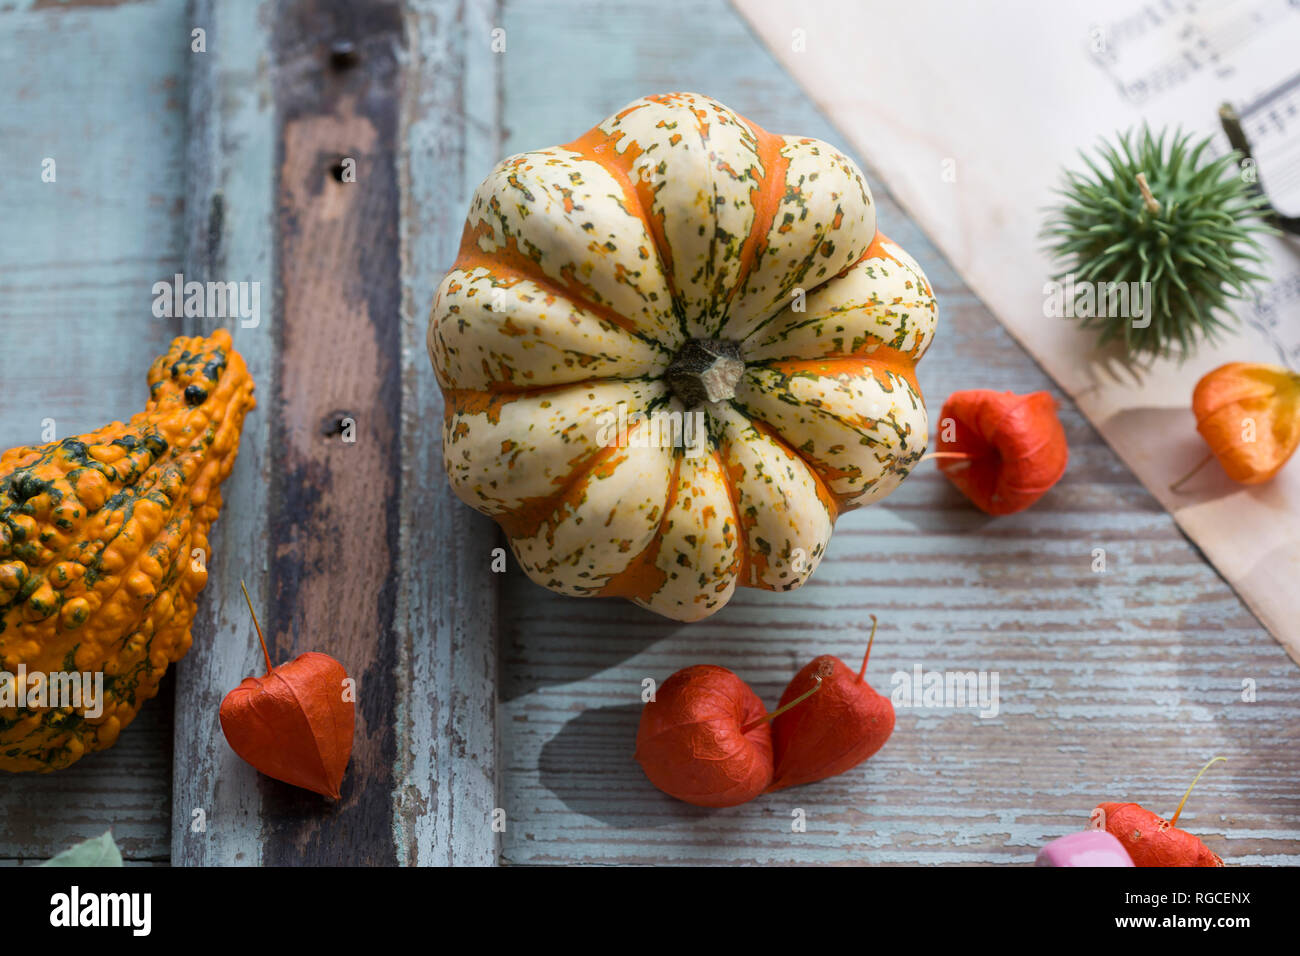 Autumnal decoration with two ornamental pumpkins and Chinese lanterns Stock Photo